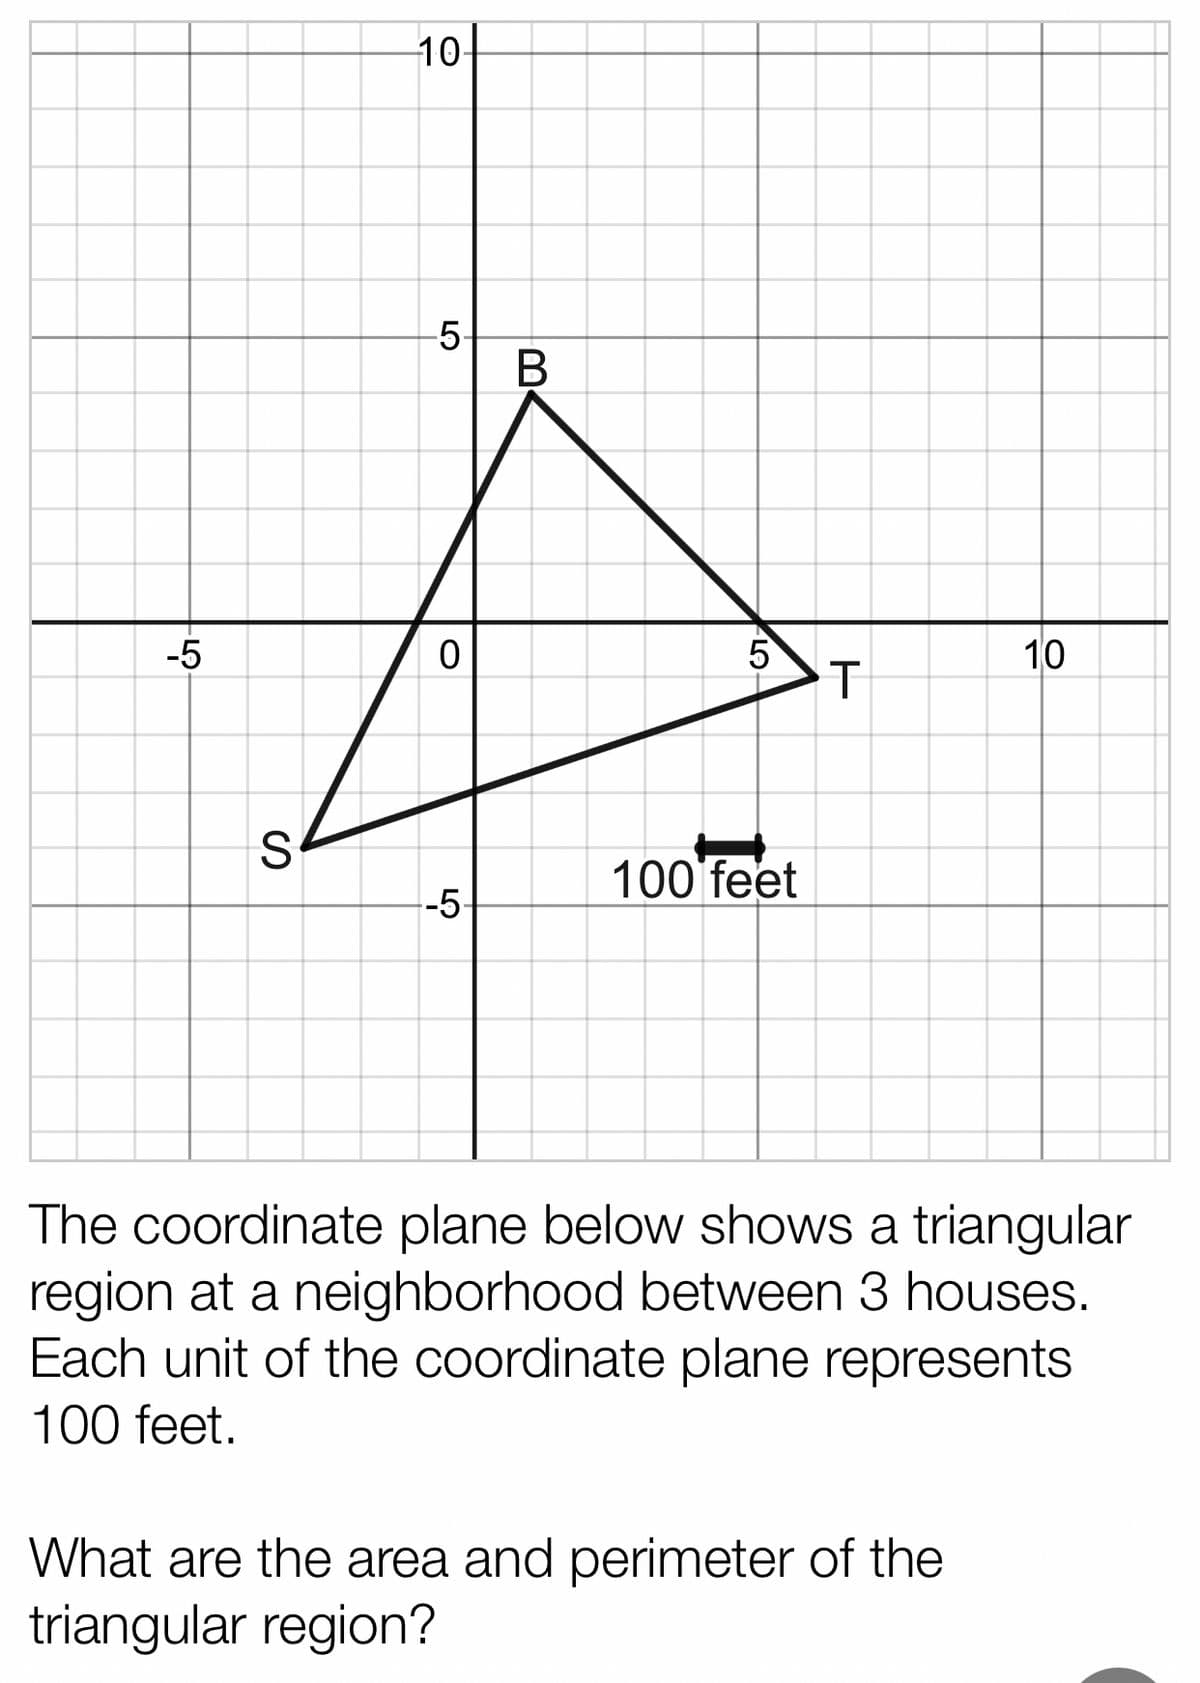 10-
-5
-5
B
0
10
S
100 feet
-5
The coordinate plane below shows a triangular
region at a neighborhood between 3 houses.
Each unit of the coordinate plane represents
100 feet.
What are the area and perimeter of the
triangular region?
LO
5
T